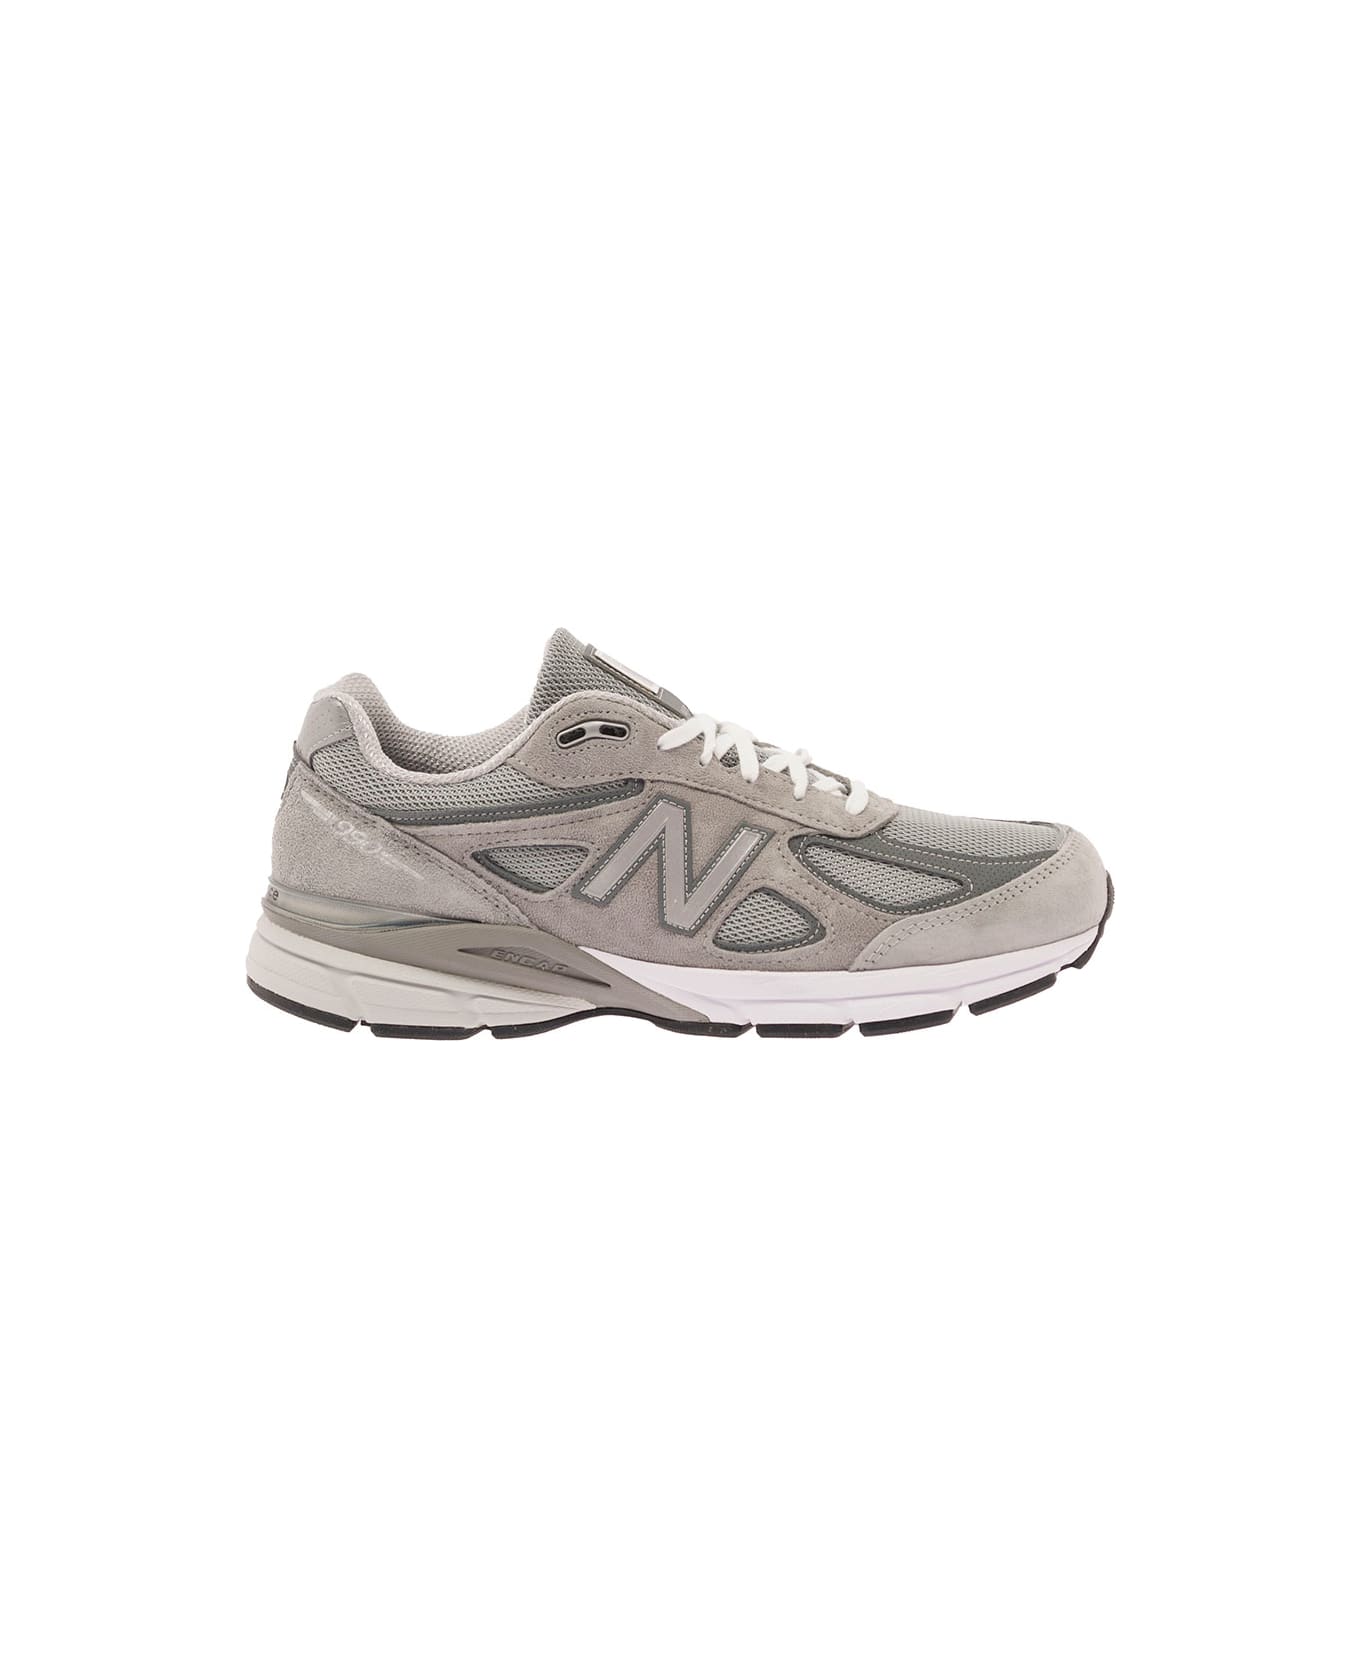 New Balance '990' Grey Low Top Sneakers With Logo Detail In Leather And Suede Woman - Grey スニーカー